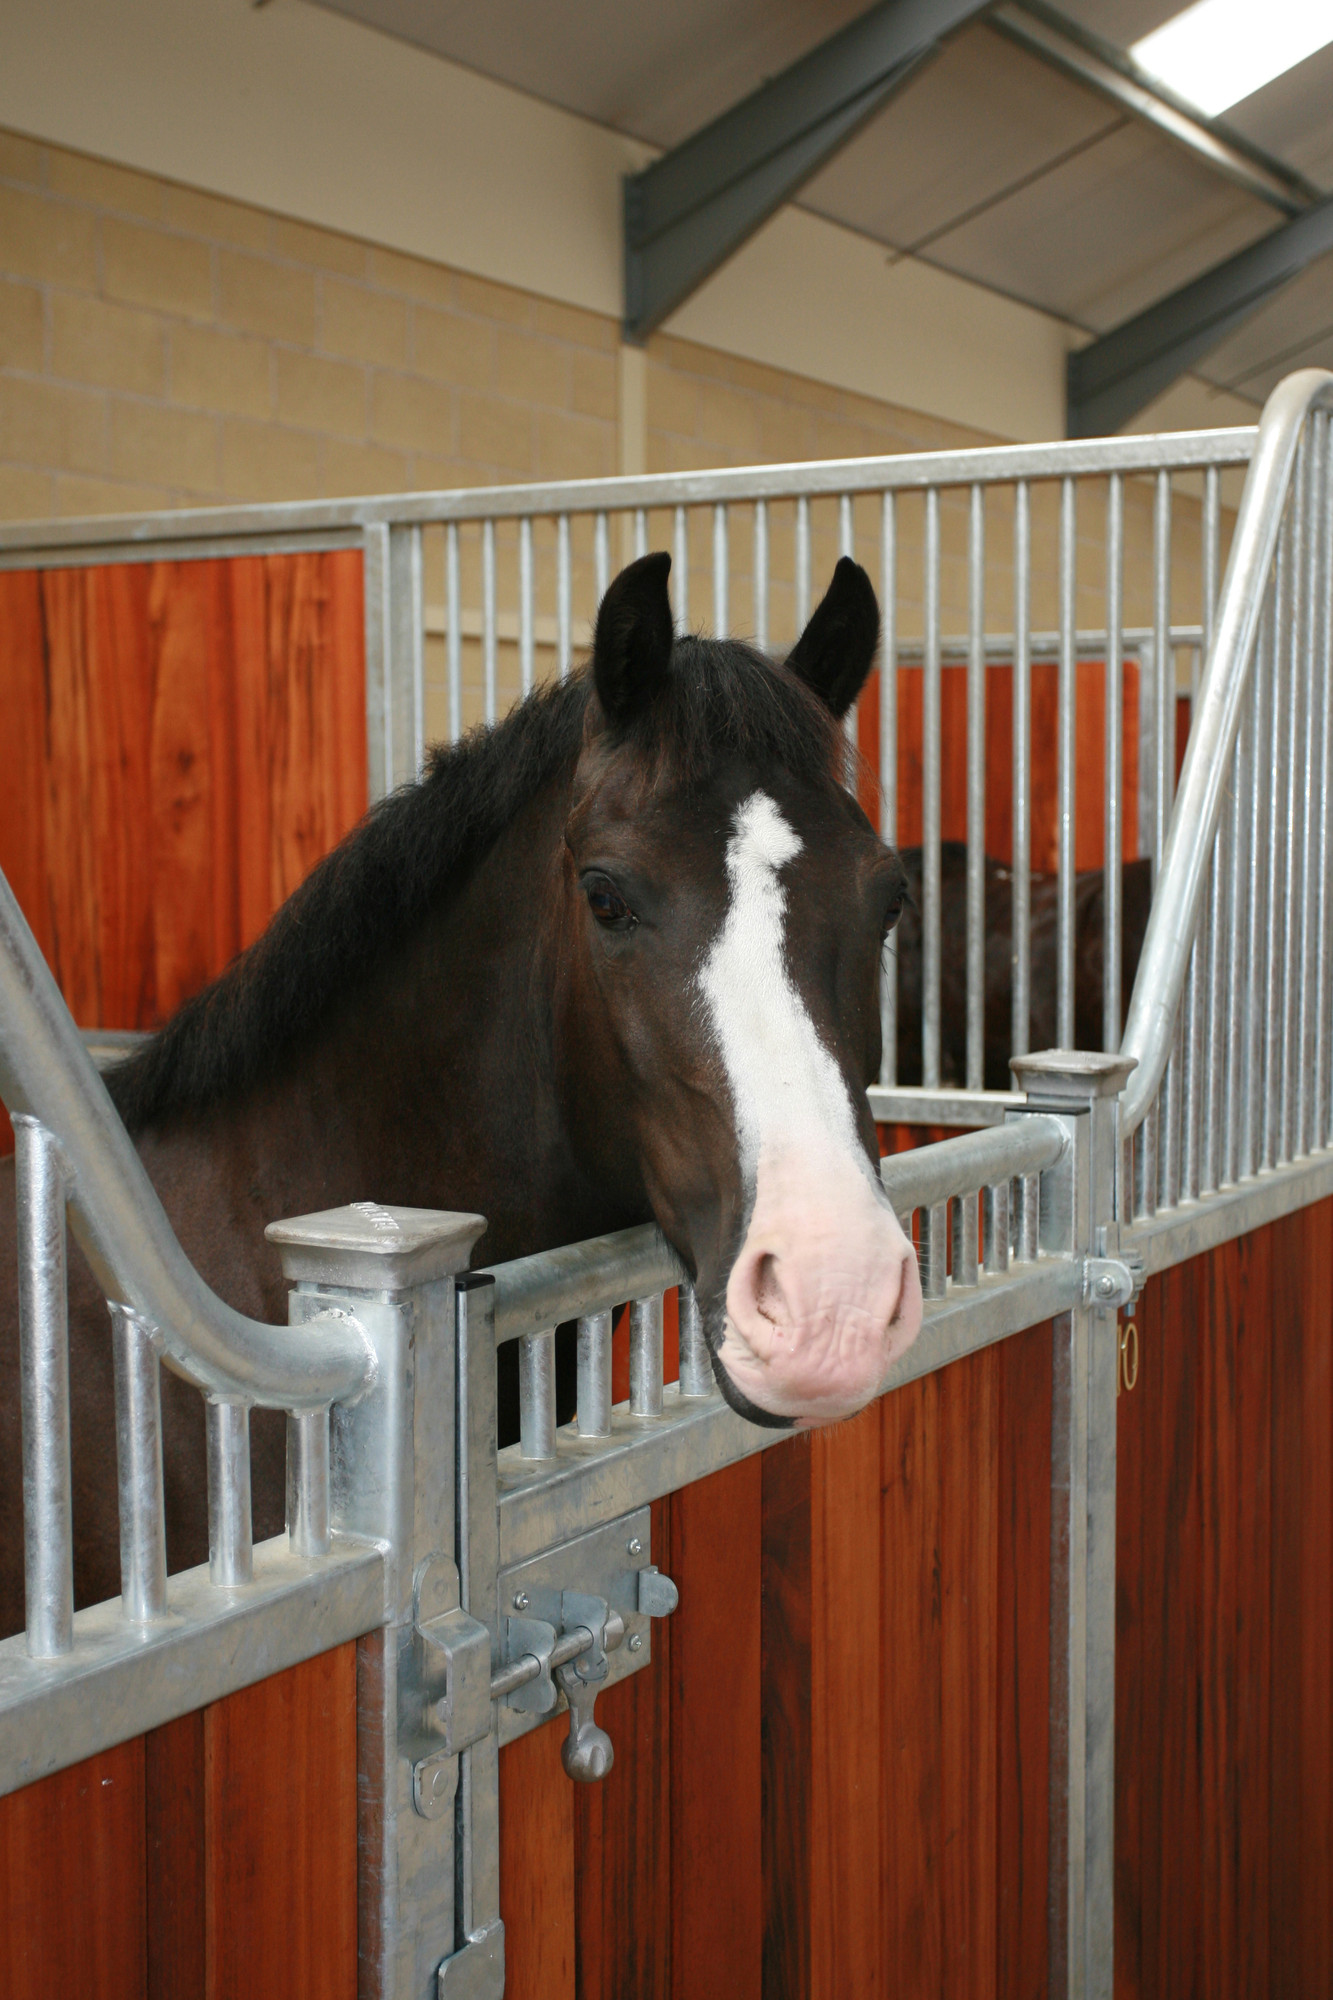 Tom in his stable at the Rolleston equine centre